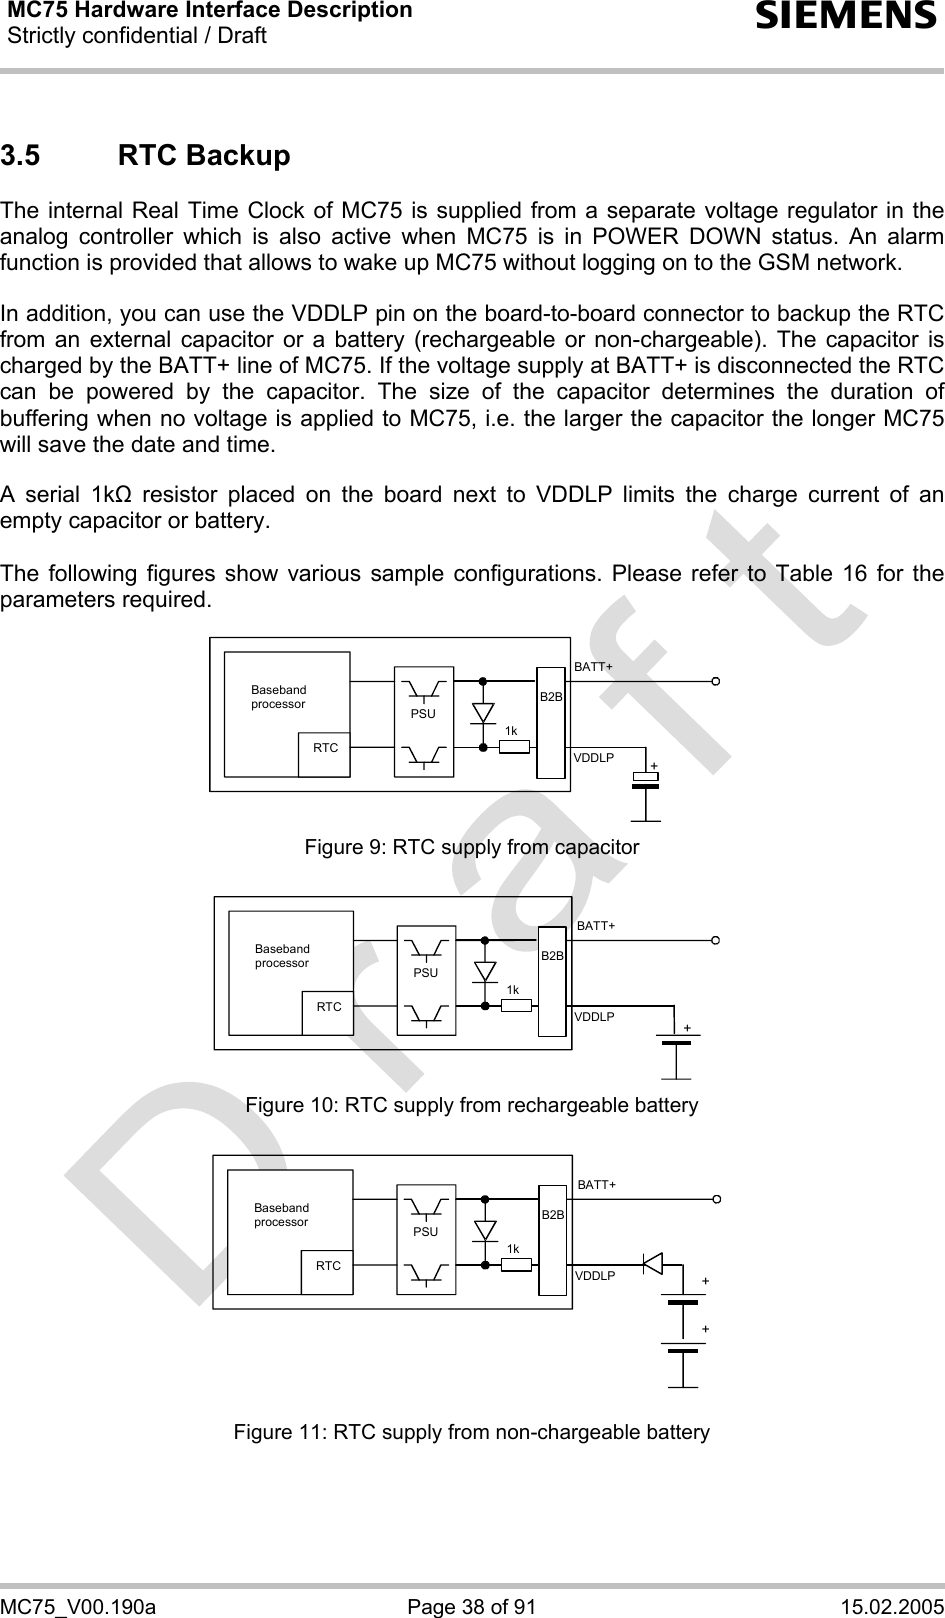 MC75 Hardware Interface Description Strictly confidential / Draft  s MC75_V00.190a  Page 38 of 91  15.02.2005 3.5 RTC Backup The internal Real Time Clock of MC75 is supplied from a separate voltage regulator in the analog controller which is also active when MC75 is in POWER DOWN status. An alarm function is provided that allows to wake up MC75 without logging on to the GSM network.   In addition, you can use the VDDLP pin on the board-to-board connector to backup the RTC from an external capacitor or a battery (rechargeable or non-chargeable). The capacitor is charged by the BATT+ line of MC75. If the voltage supply at BATT+ is disconnected the RTC can be powered by the capacitor. The size of the capacitor determines the duration of buffering when no voltage is applied to MC75, i.e. the larger the capacitor the longer MC75 will save the date and time.   A serial 1k resistor placed on the board next to VDDLP limits the charge current of an empty capacitor or battery.   The following figures show various sample configurations. Please refer to Table 16 for the parameters required.    Baseband processor RTC PSU+BATT+ 1kB2BVDDLP Figure 9: RTC supply from capacitor   RTC +BATT+ 1kB2BVDDLPBaseband processor PSU Figure 10: RTC supply from rechargeable battery   RTC ++BATT+ 1kVDDLPB2BBaseband processor PSU Figure 11: RTC supply from non-chargeable battery 